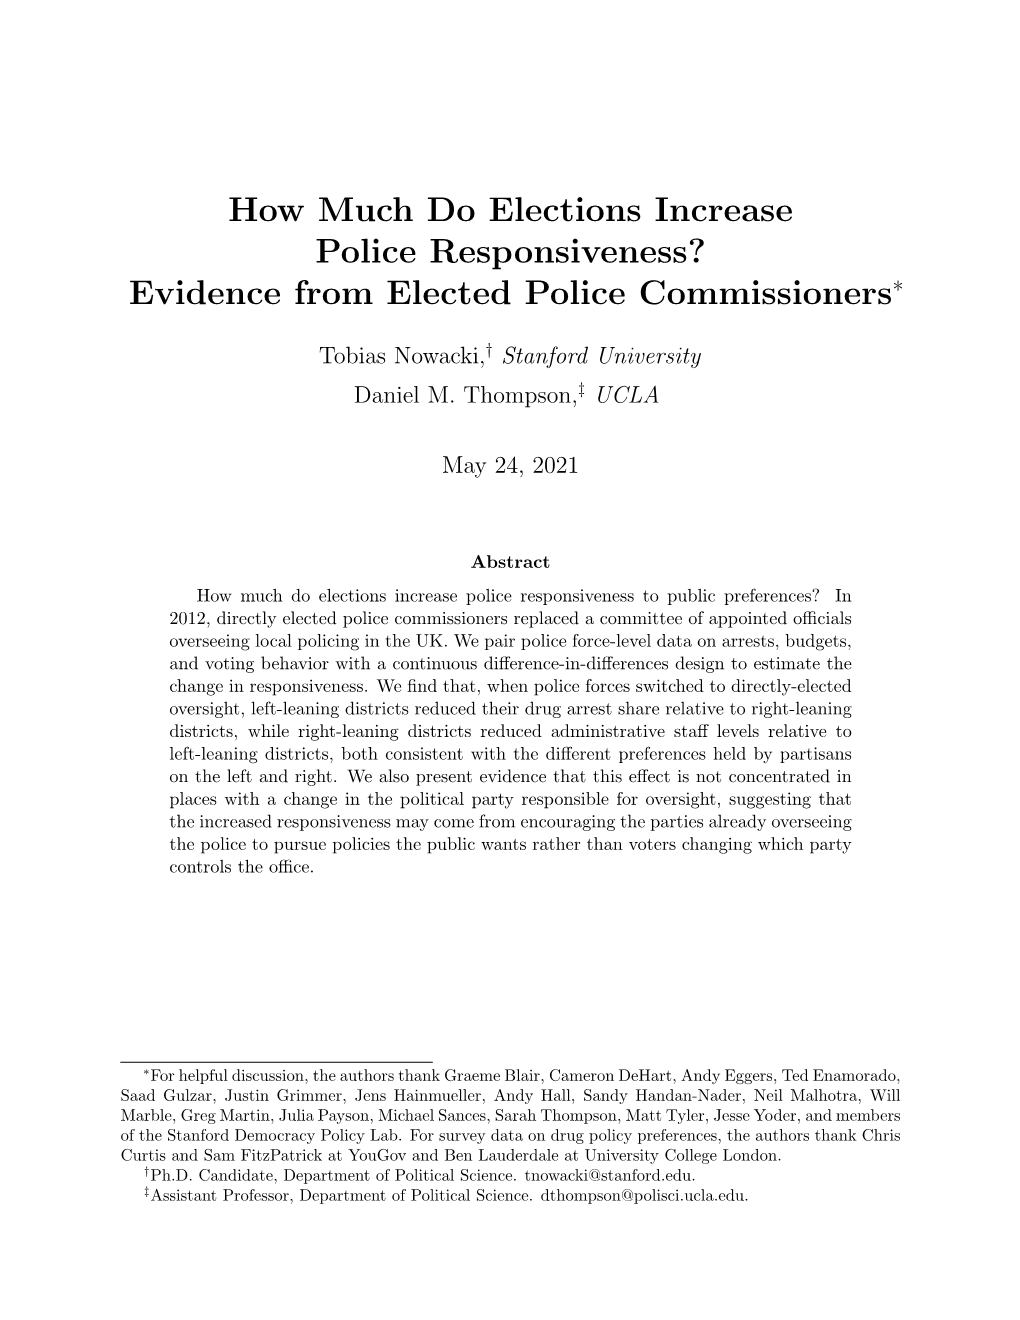 How Much Do Elections Increase Police Responsiveness? Evidence from Elected Police Commissioners∗